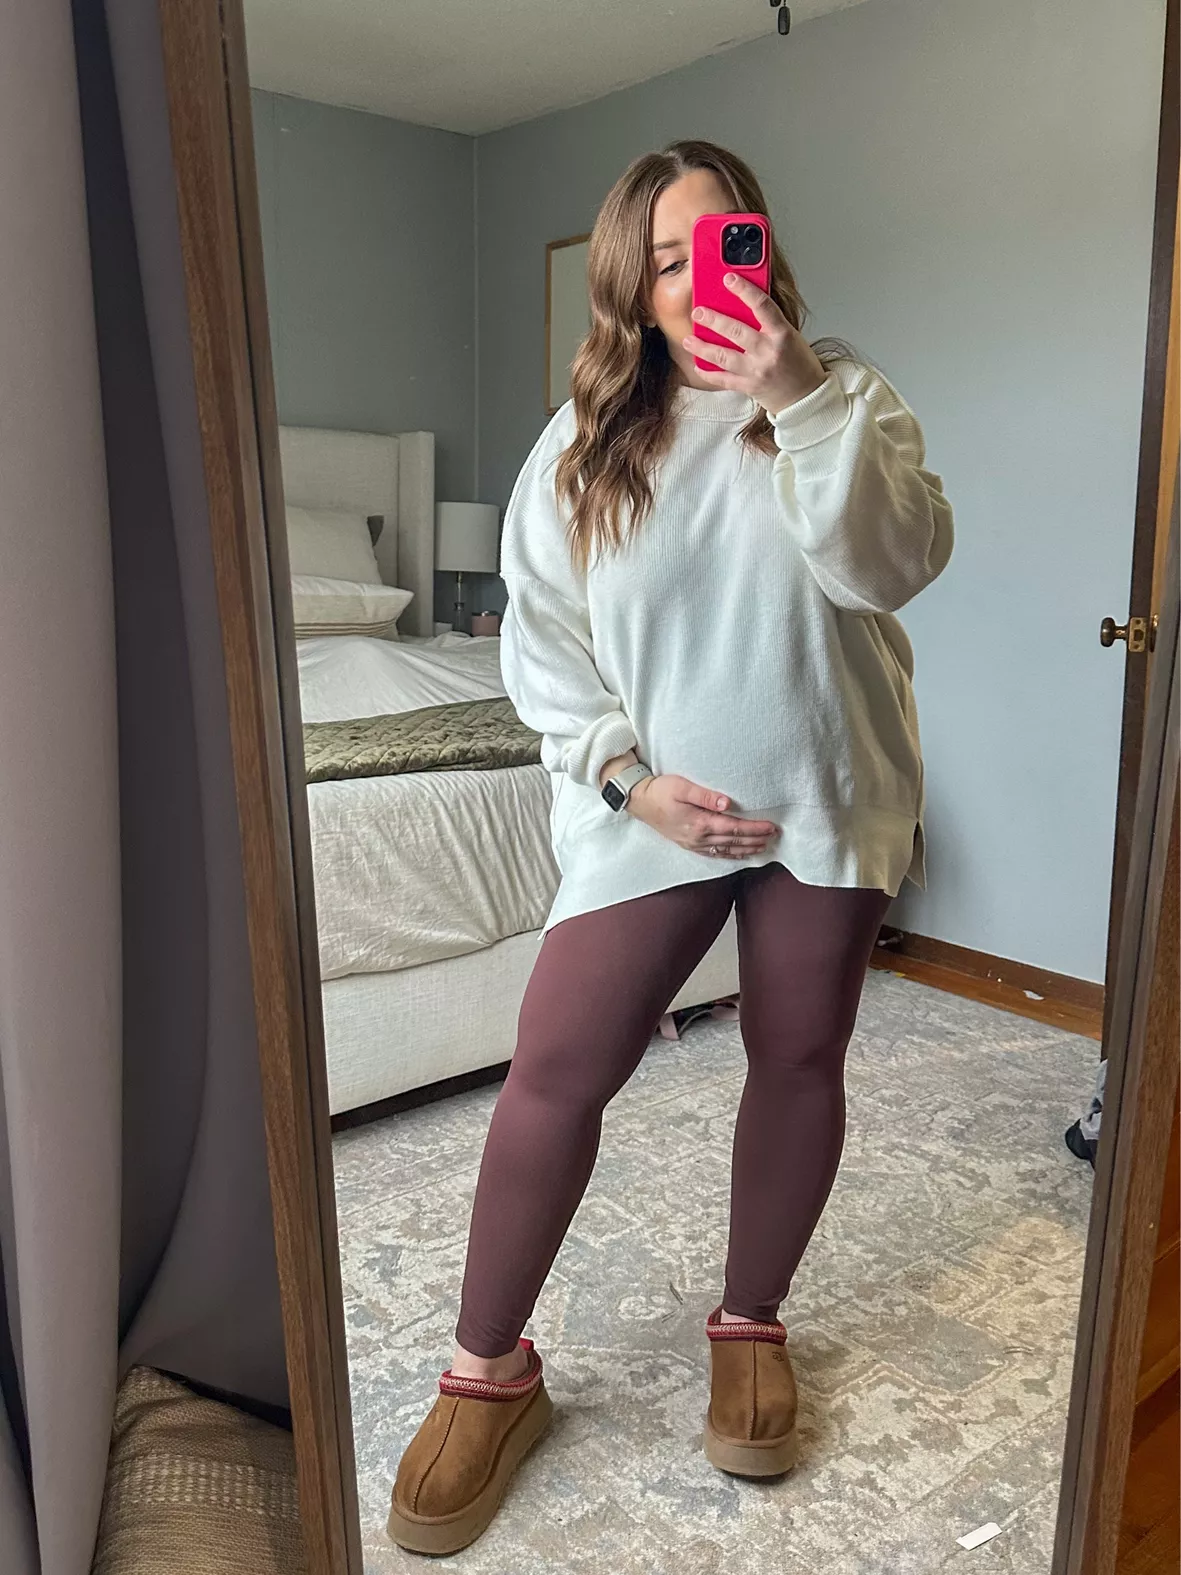 Wearing my Butterluxe leggings for the whole pregnancy journey